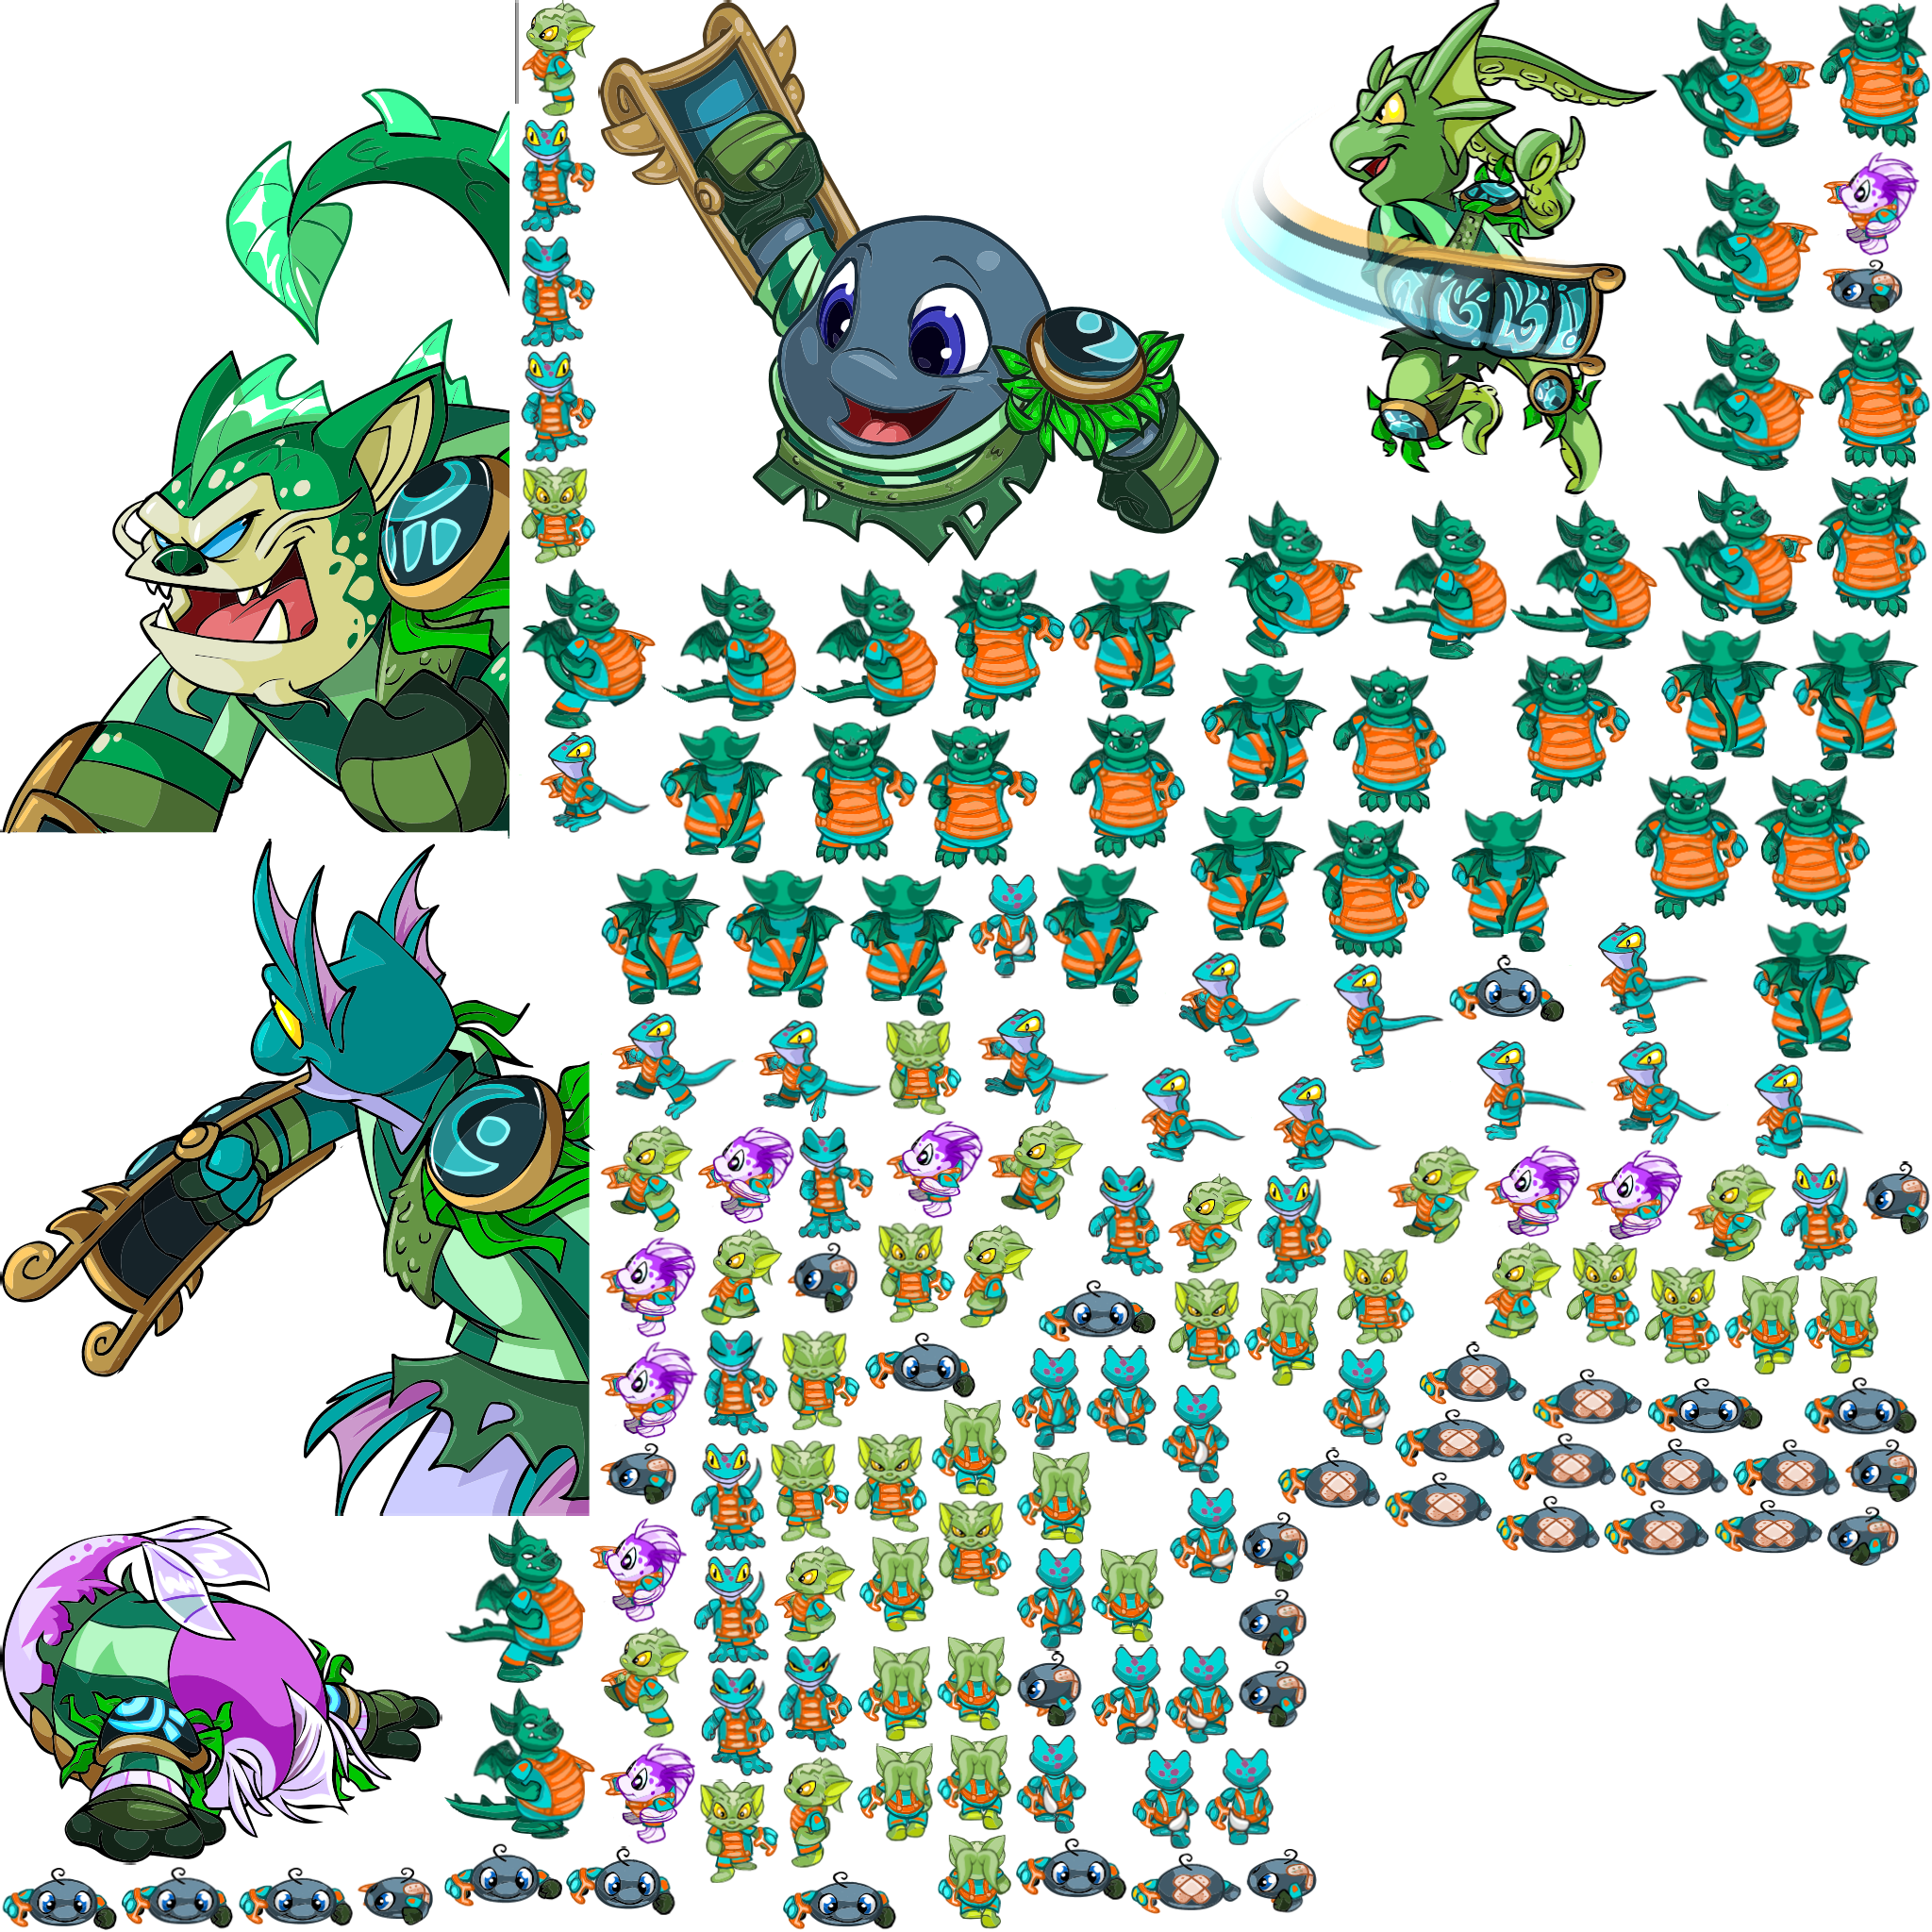 https://images.neopets.com/games/h5/yyb/Yooyuball_texture_81.png